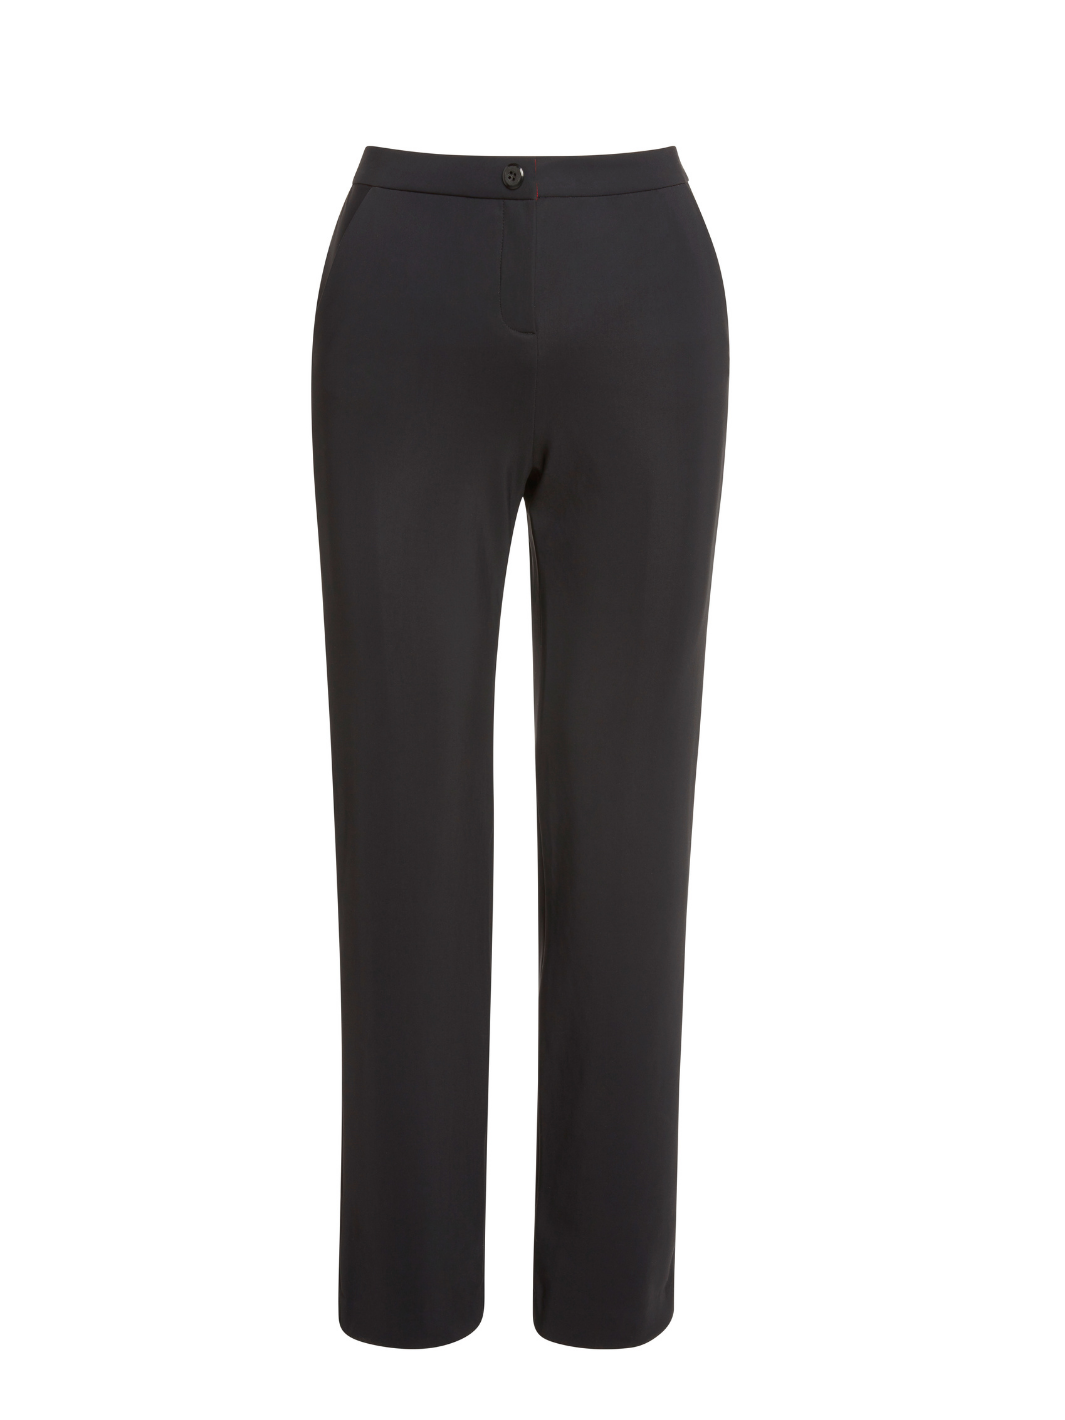 The Kelley - Silk Detailed Pant